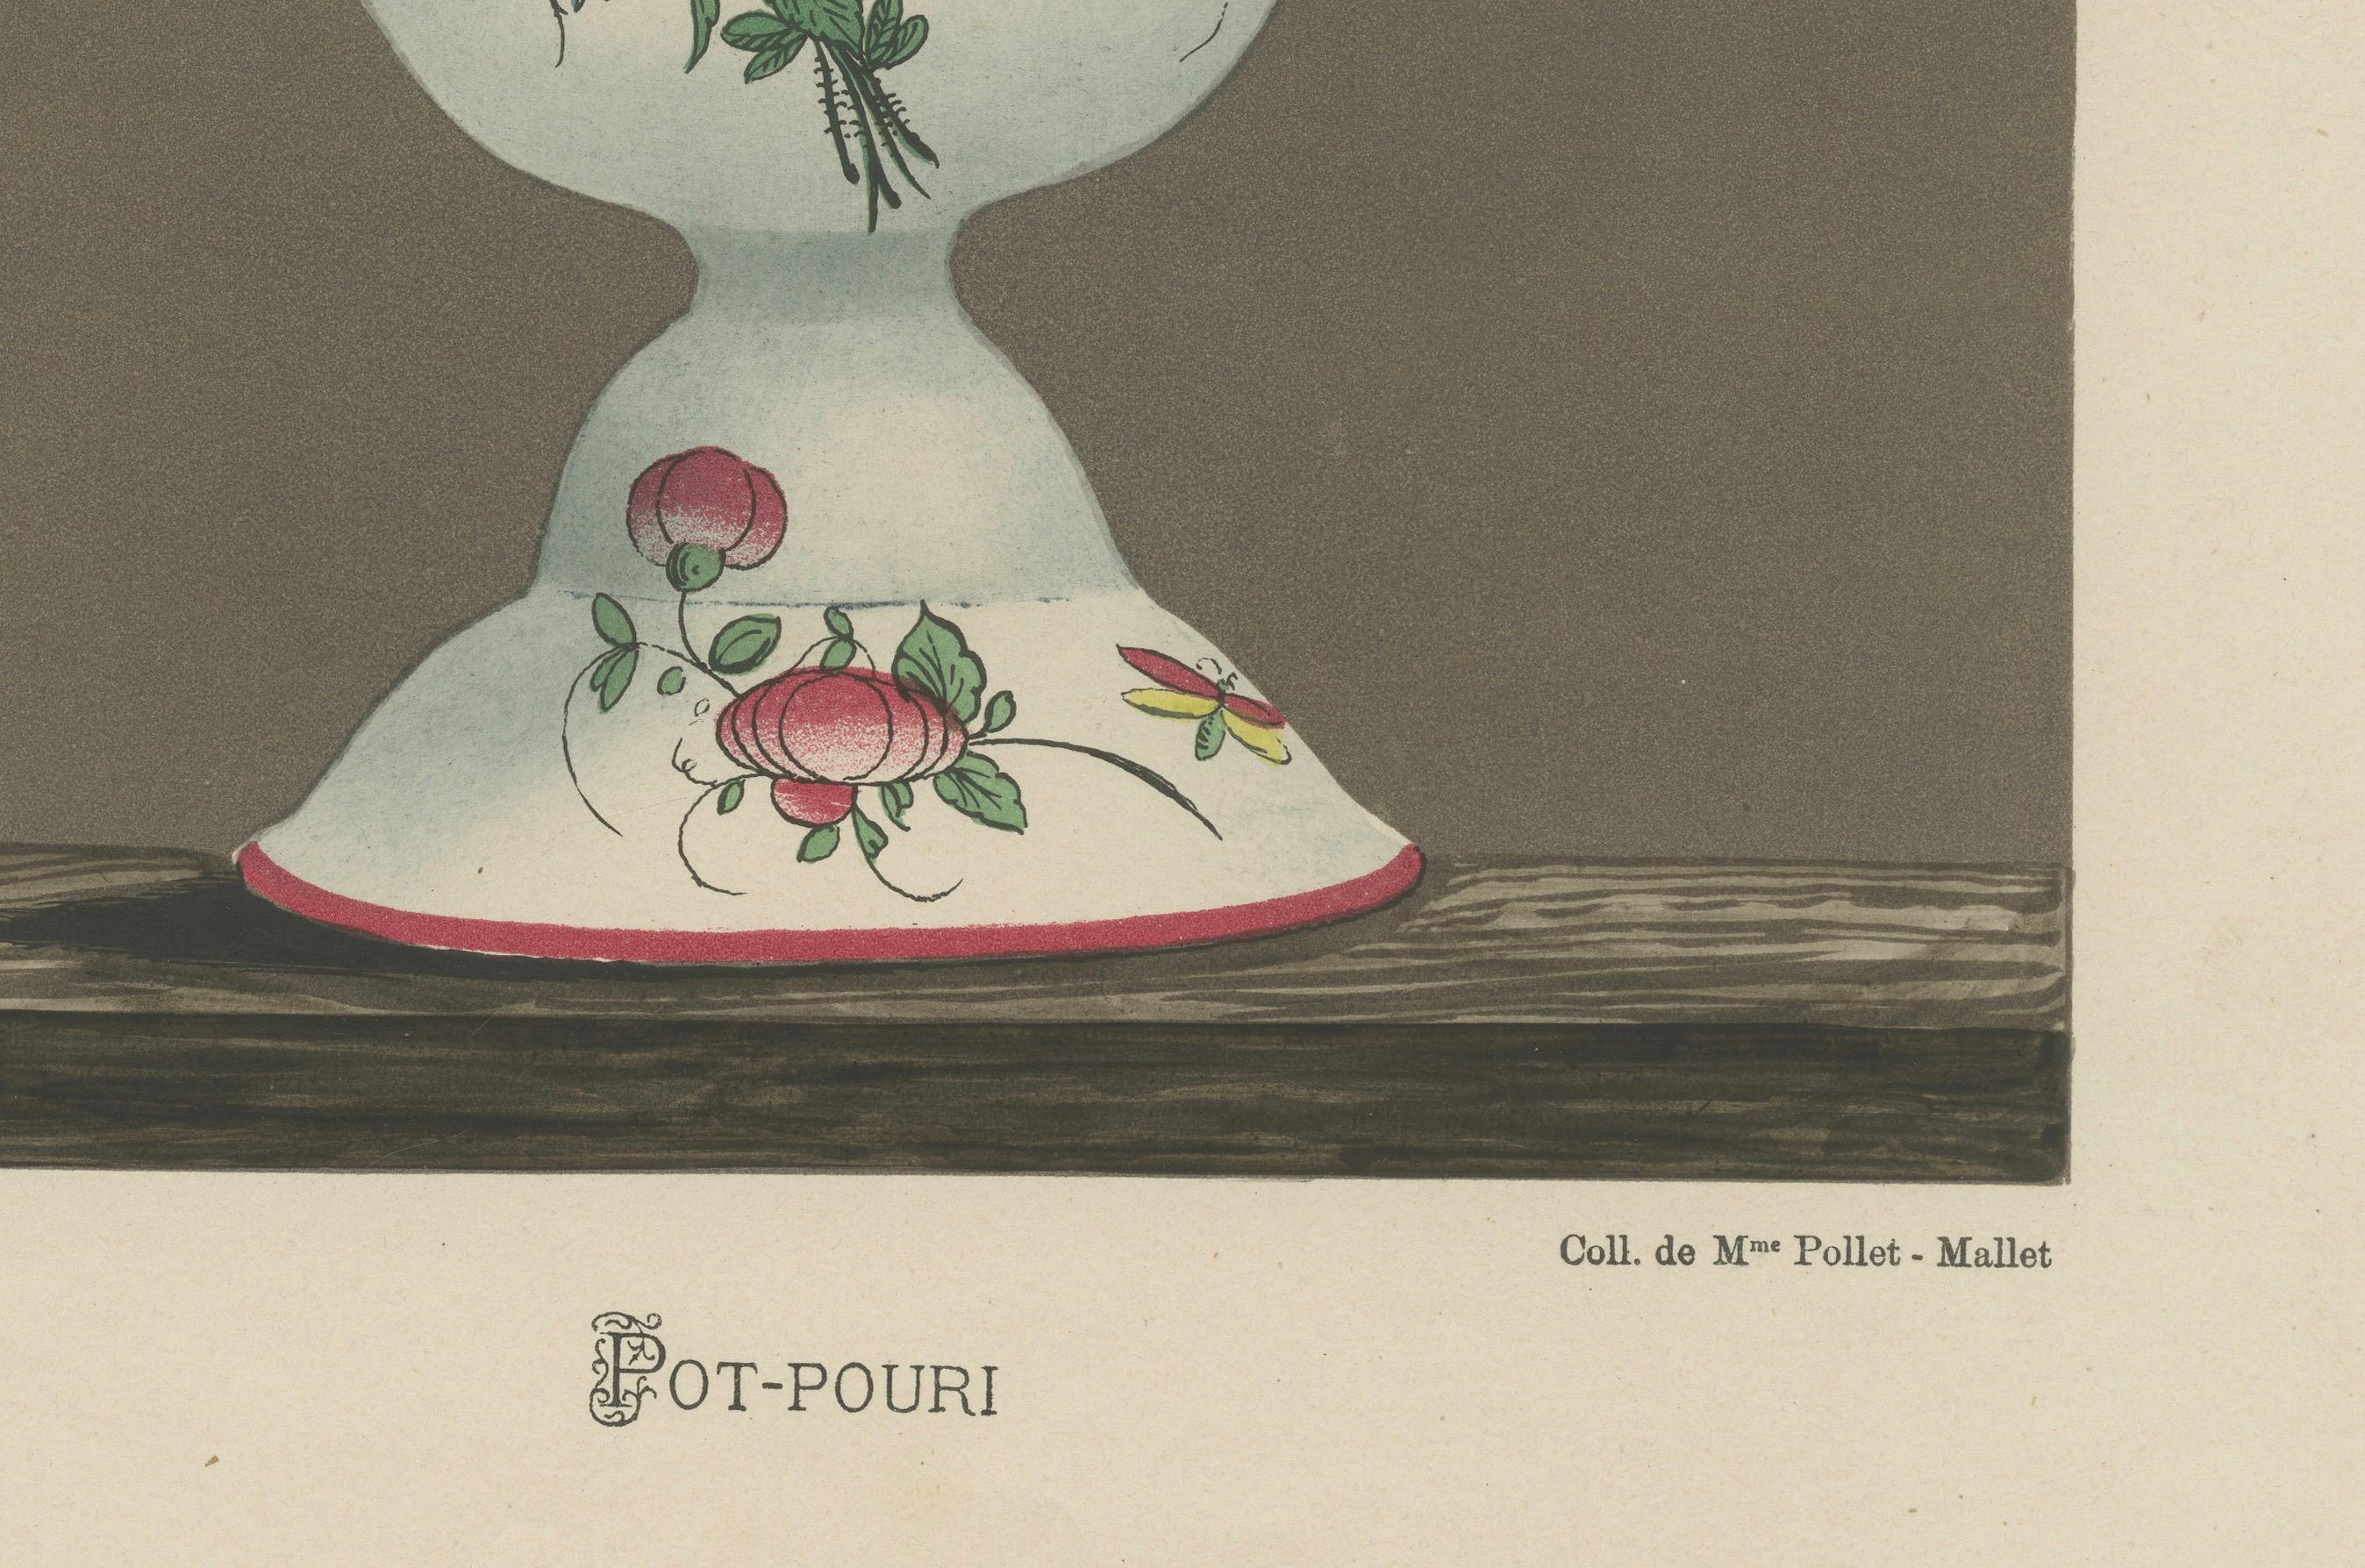 This chromolithograph depicts a Strasbourg pot-pourri vessel, richly adorned with floral motifs in a vibrant palette that includes a prominent red rose as the centerpiece. 

The pot, which is part of Plate 108 from a collection, includes decorative